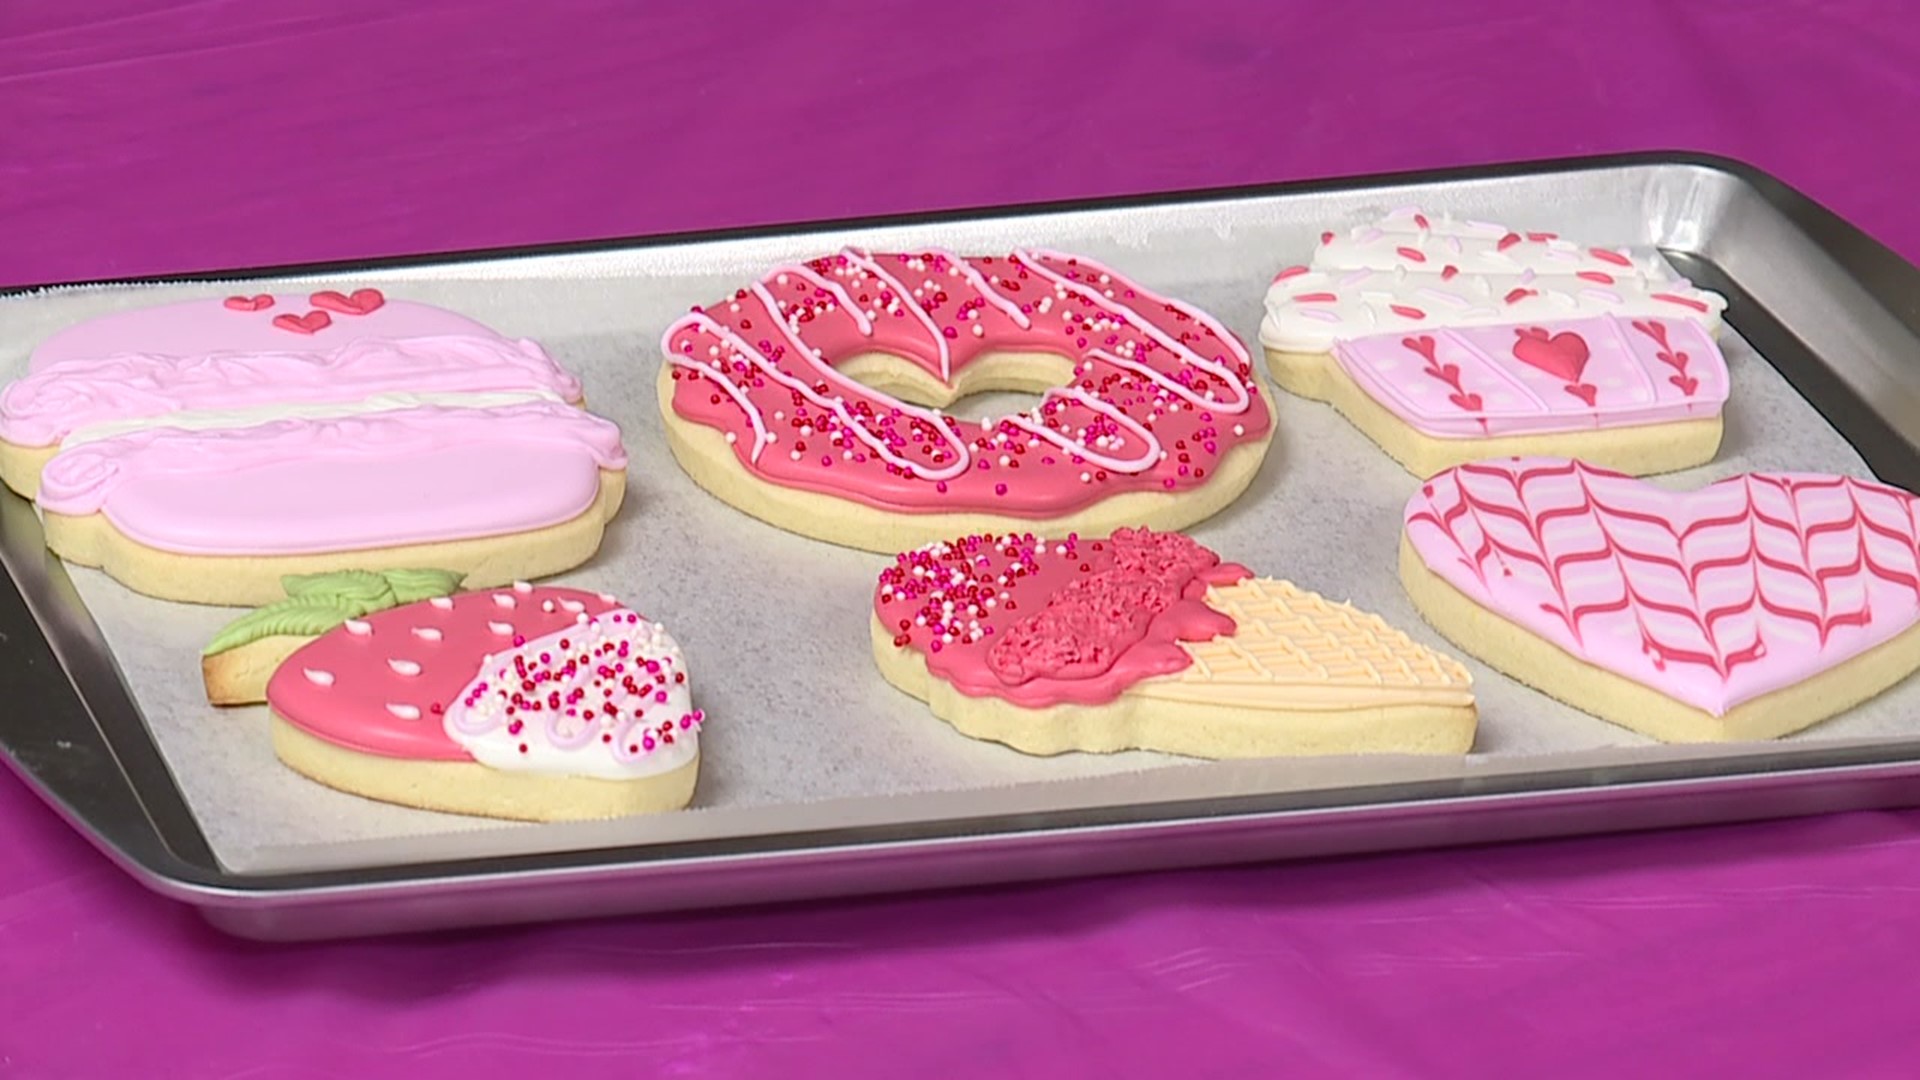 Valentine's Day is just around the corner. But this year, instead of a store-bought gift, how about making or even baking one?